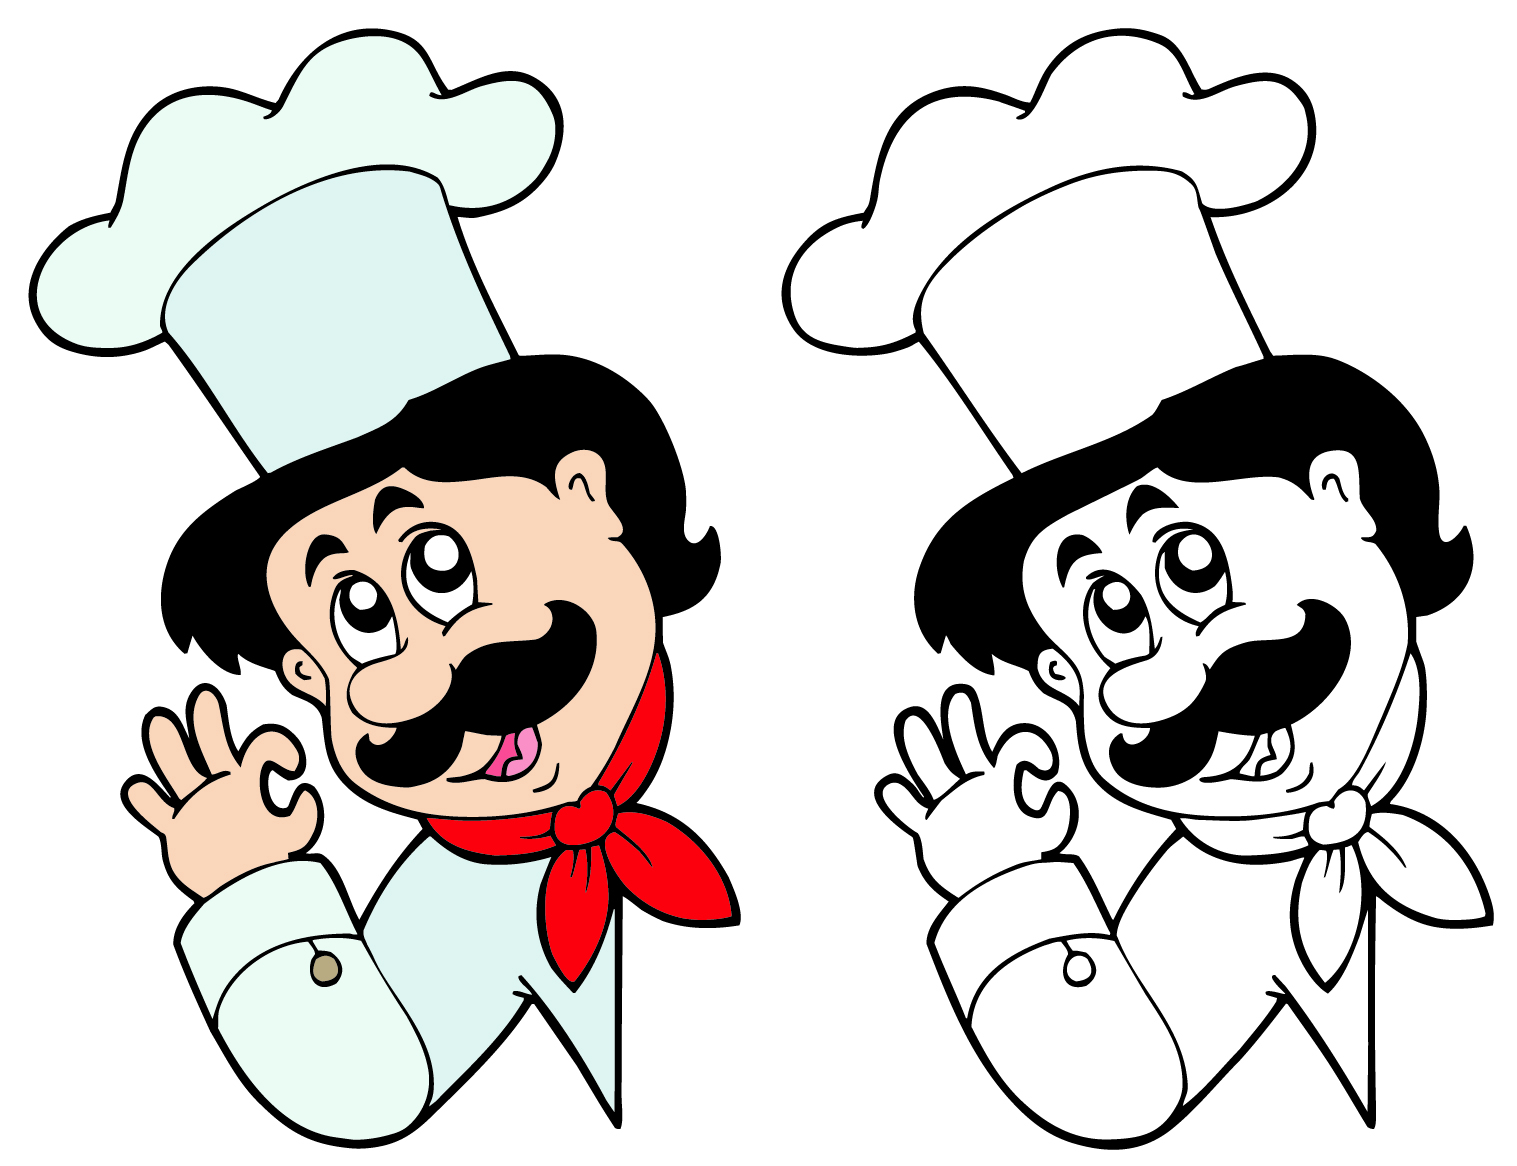 Cartoon characters chef 06 vector is free Vector cartoon vector that you can download for free. it has been downloaded 100 times since January 05, 2013.